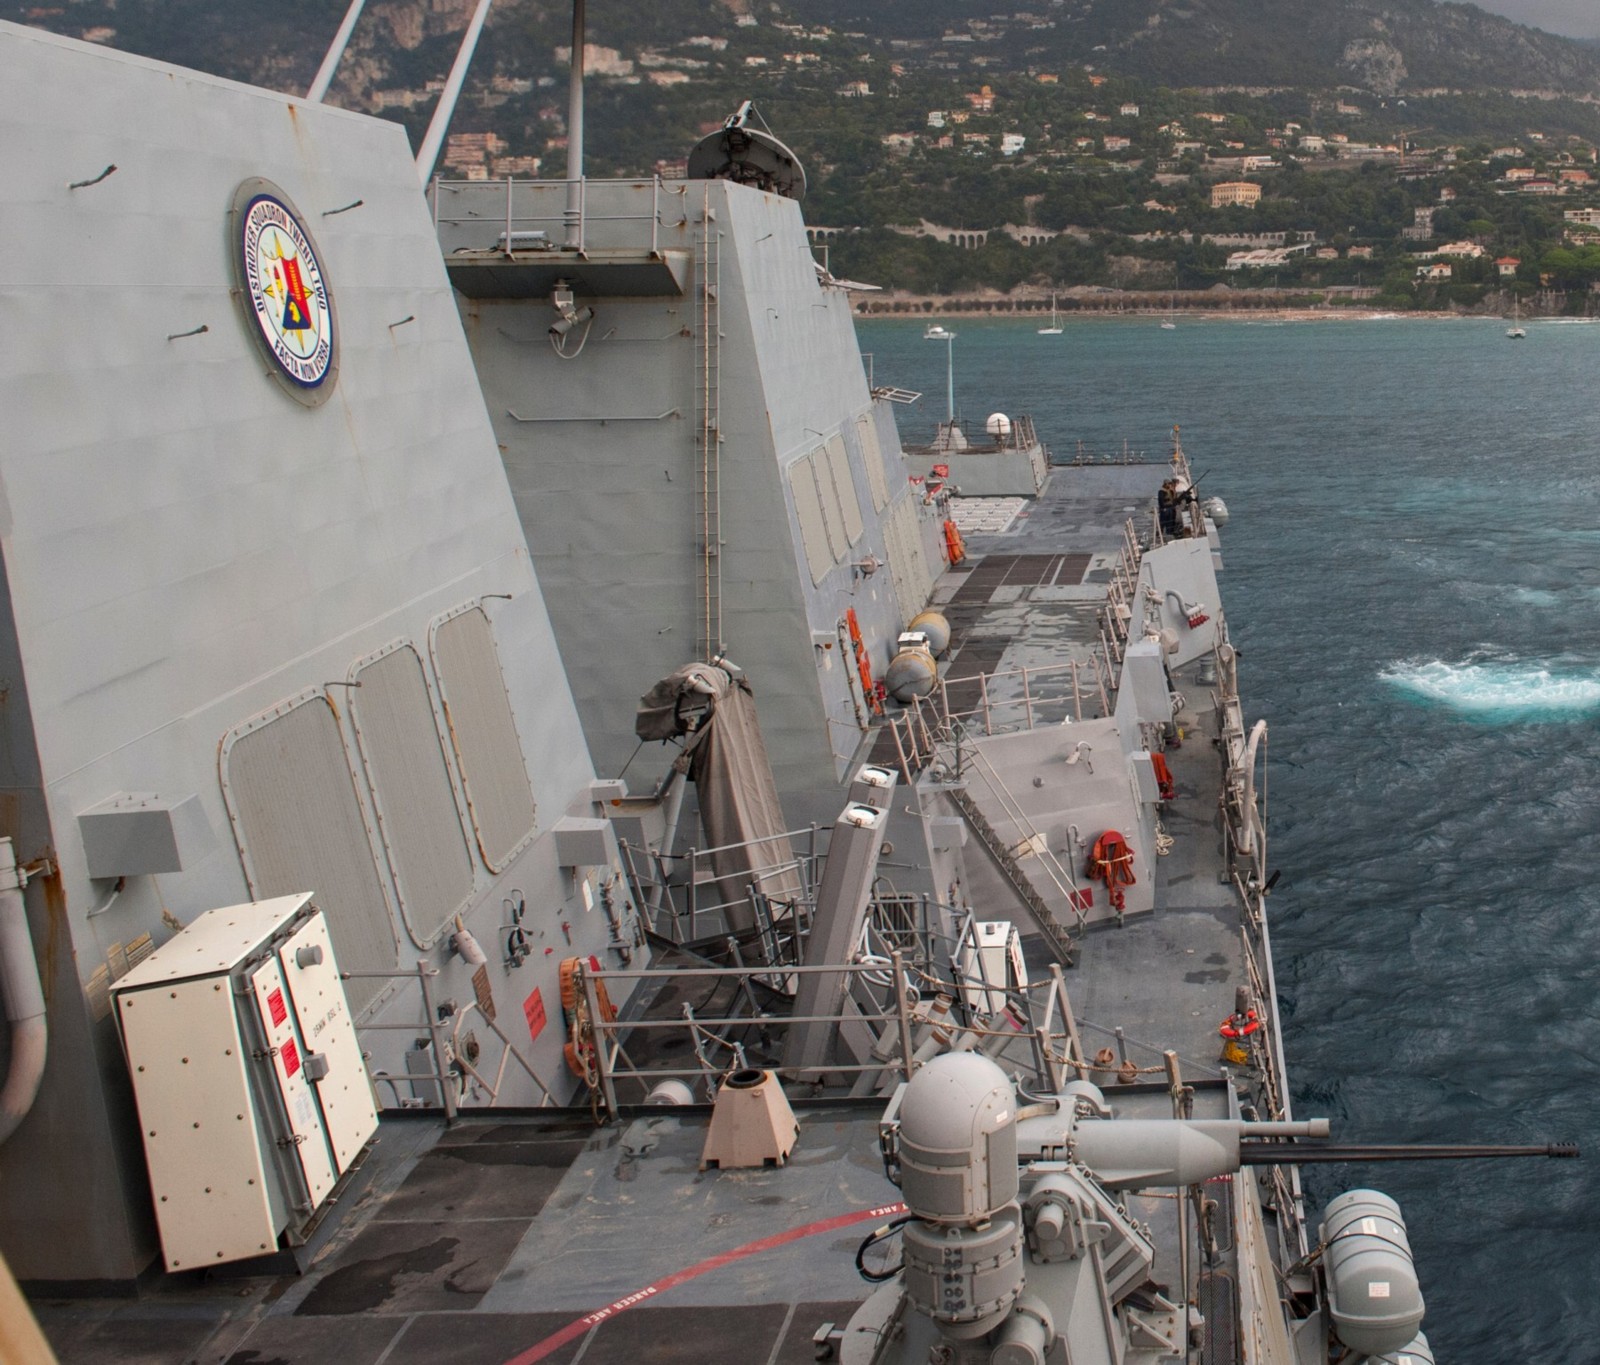 ddg-103 uss truxtun arleigh burke class guided missile destroyer aegis us navy villefranche france 13